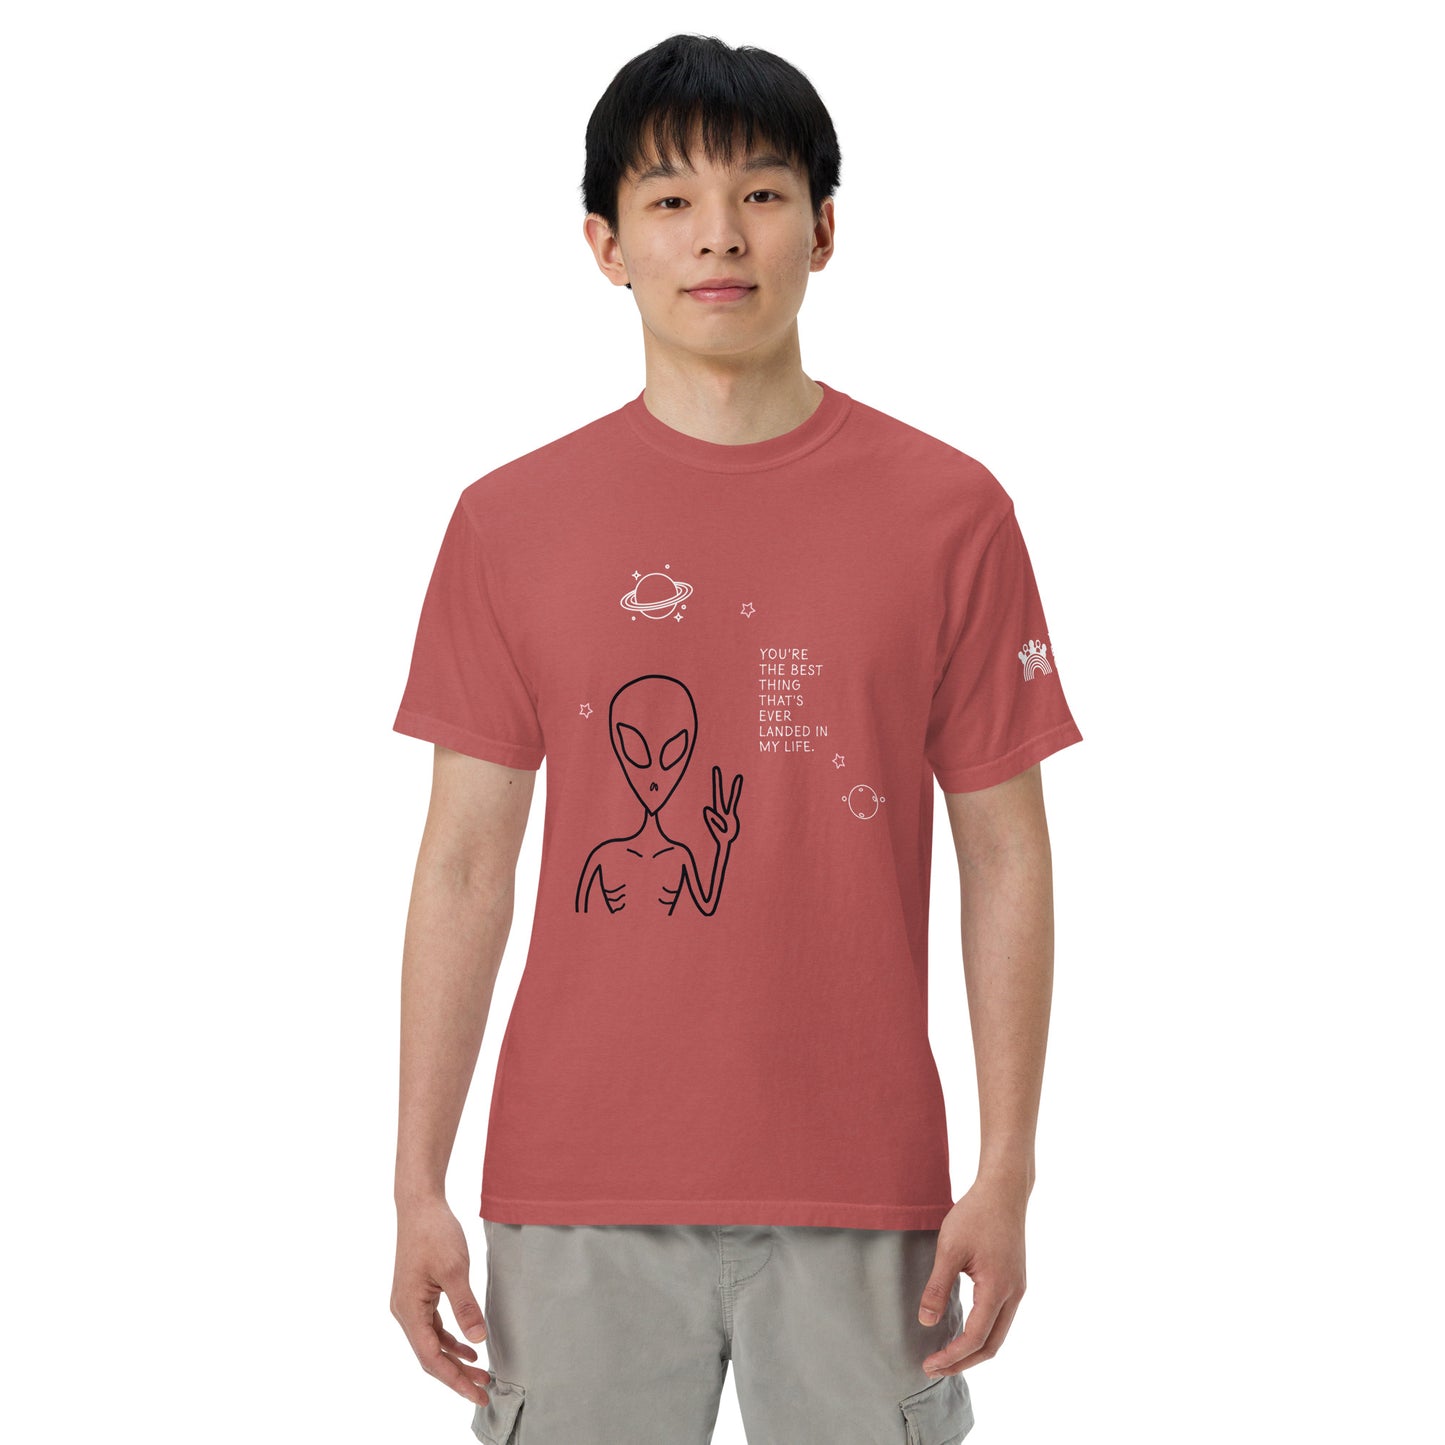 The Equality Crew Alien T-shirt